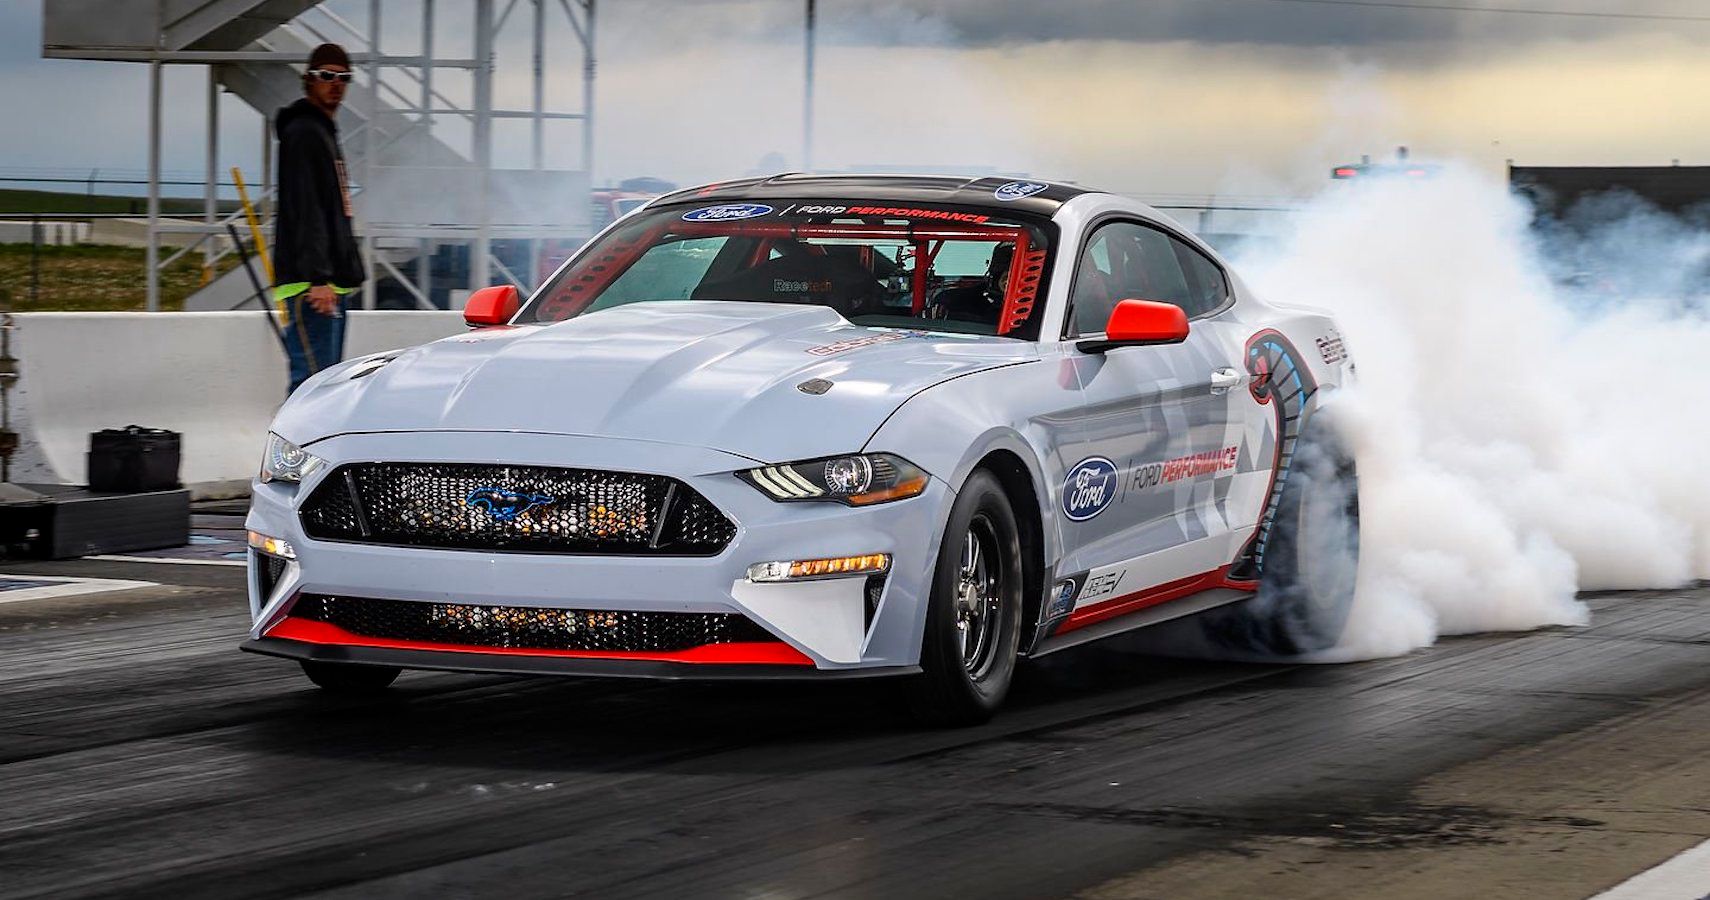 All-Electric Mustang Cobra Jet 1400 Prototype on drag strip